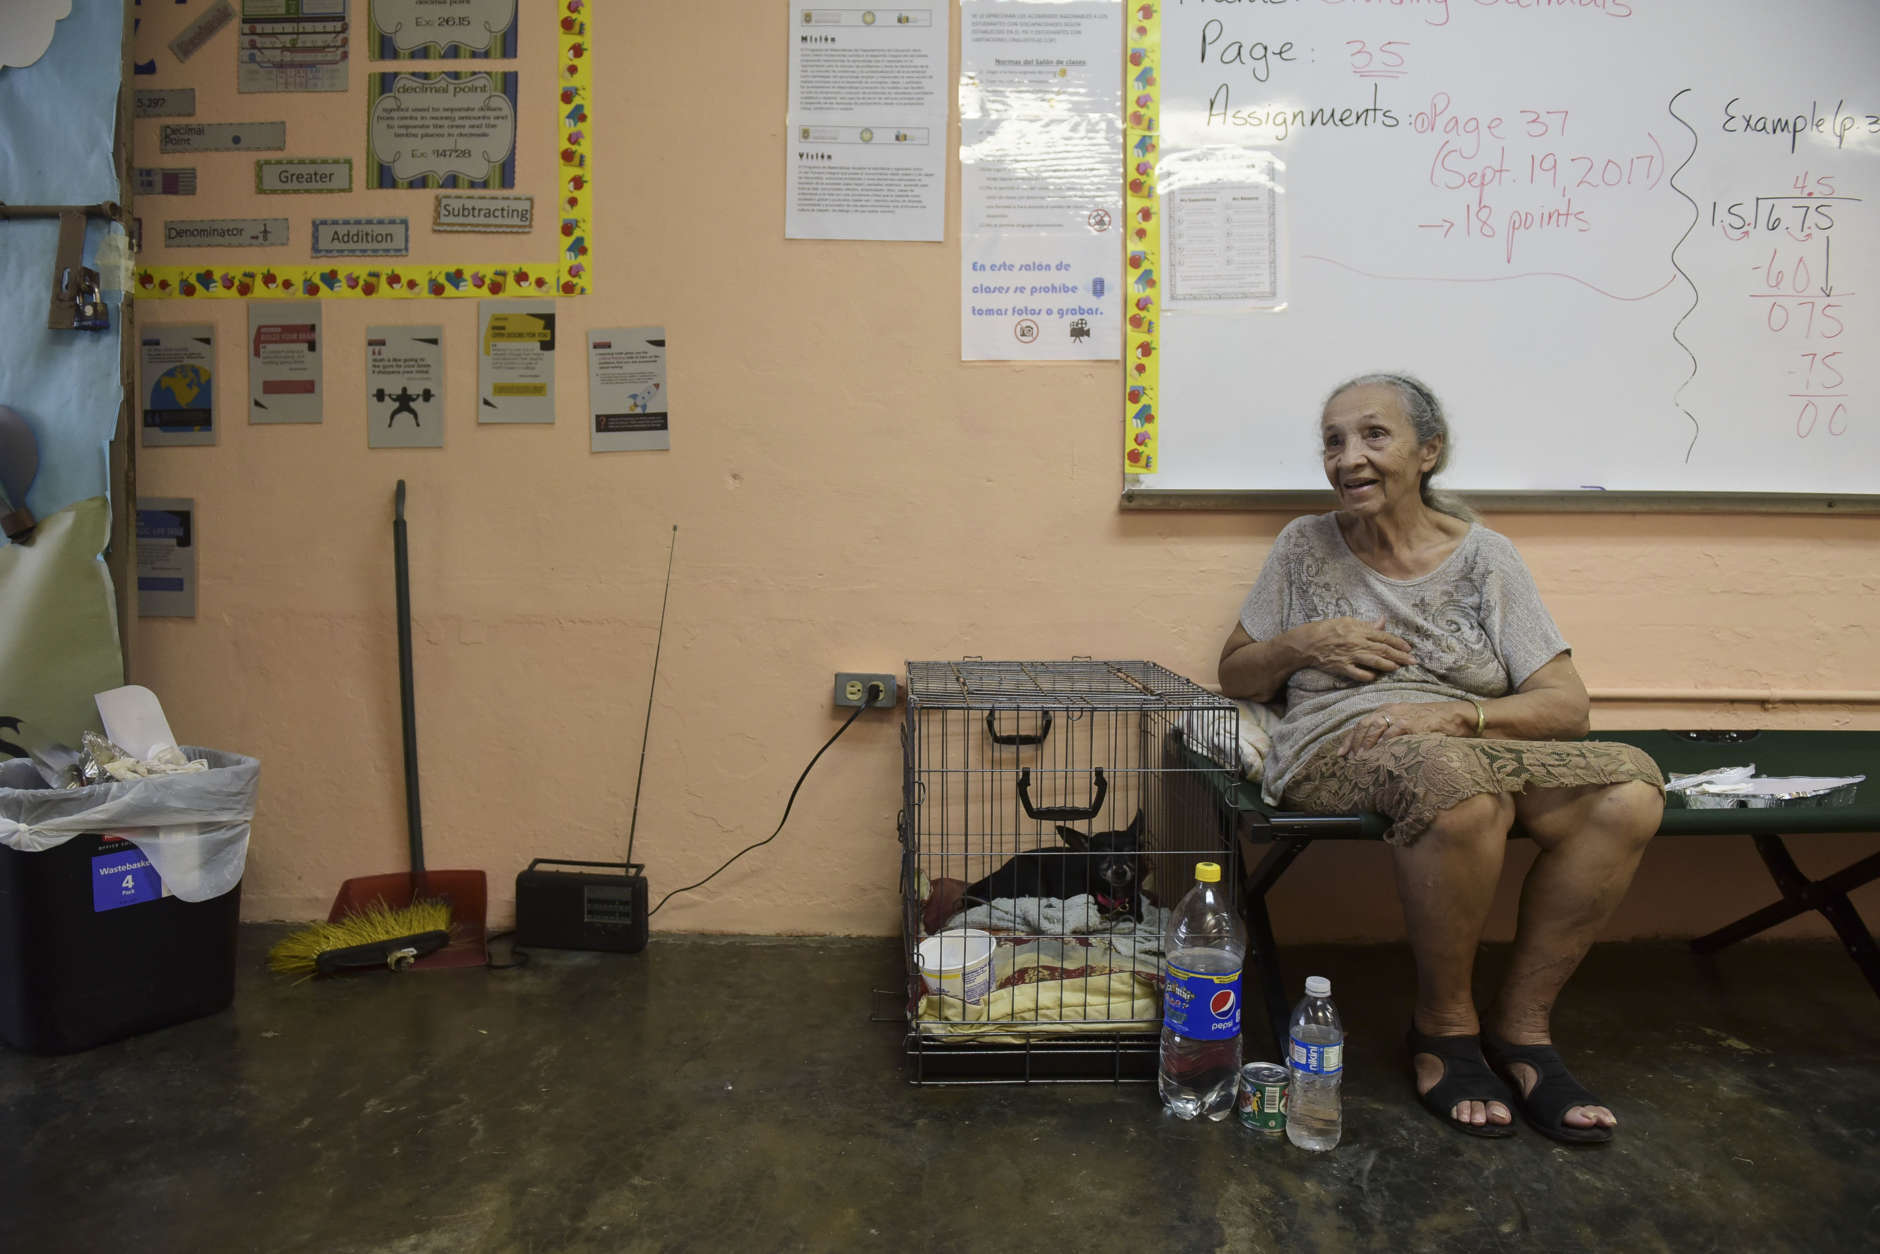 Evacuee Guillermina Reyes, 90, sits with with her pet dog Blackie at the Juan Ponce de Leon Elementary School before the arrival of Hurricane Maria, in Humacao, Puerto Rico, Tuesday, Sept. 19, 2017. Puerto Rico is likely to take a direct hit by the category 5 hurricane. Authorities warned people who live in wooden or flimsy homes should find safe shelter before the storm's expected arrival on Wednesday. (AP Photo/Carlos Giusti)